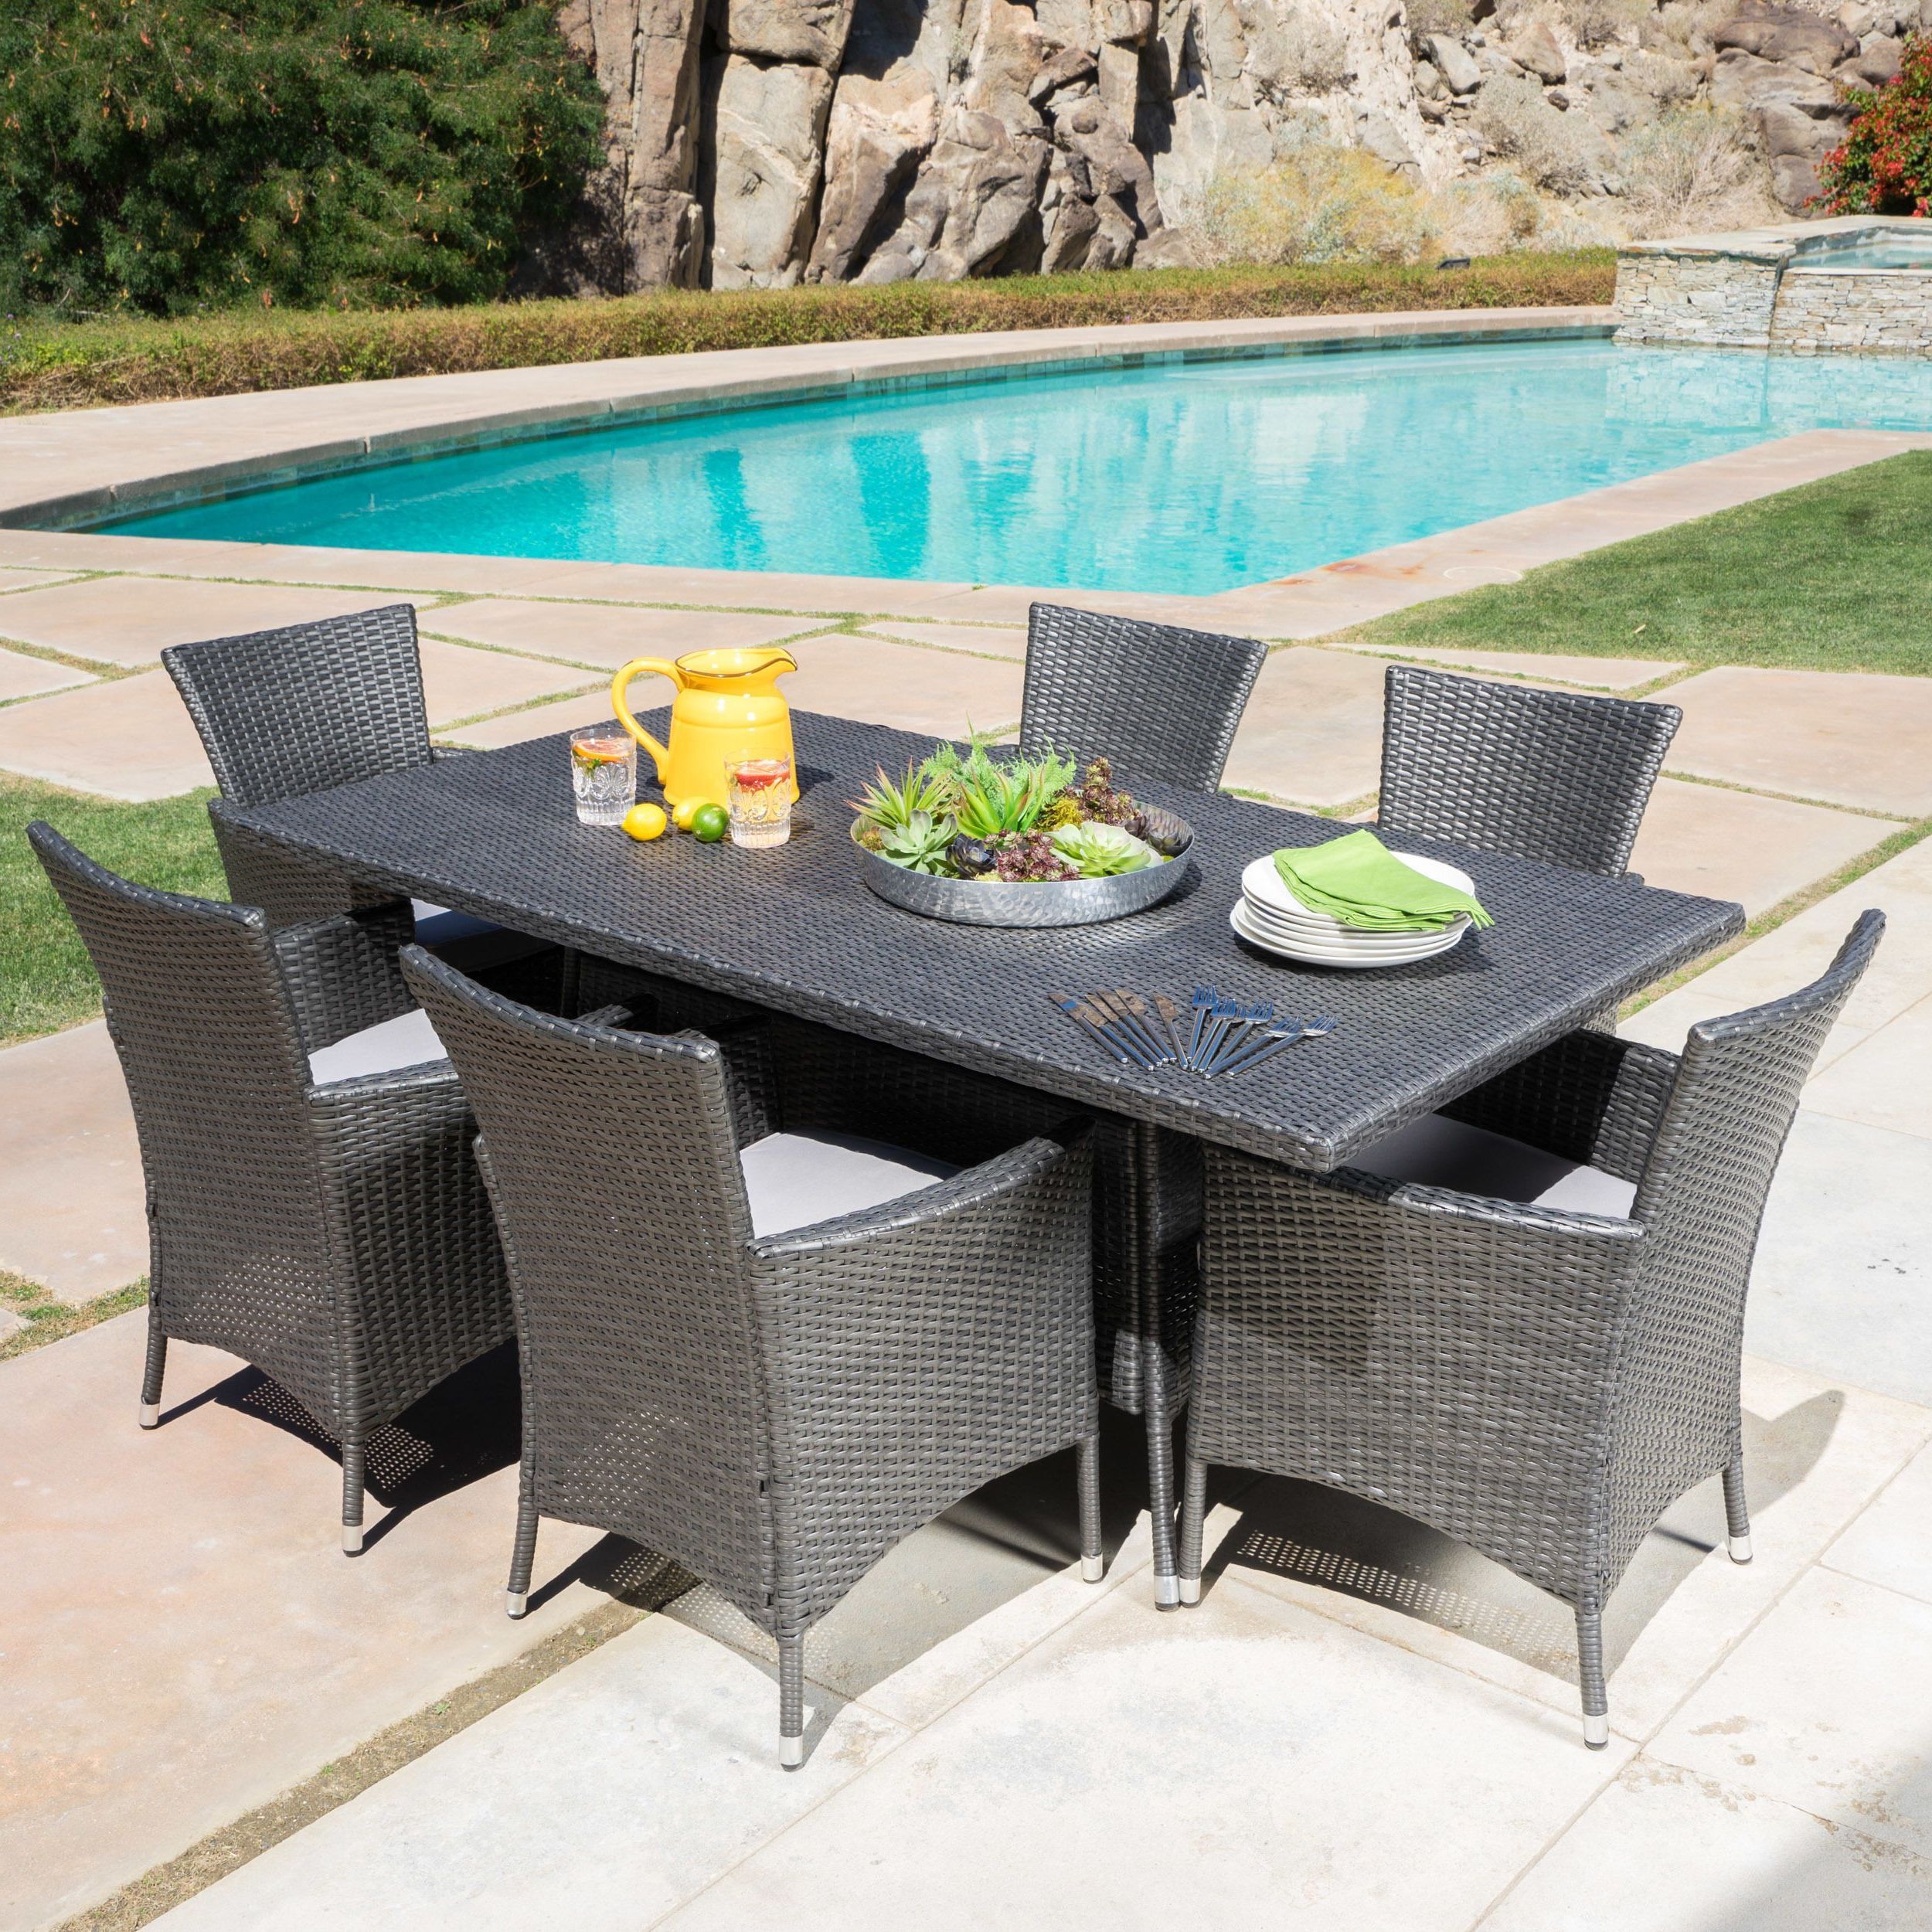 Malta Outdoor 7 Piece Rectangle Wicker Dining Set With Cushions Inside Most Recently Released Wicker Rectangular Patio Dining Sets (View 6 of 15)